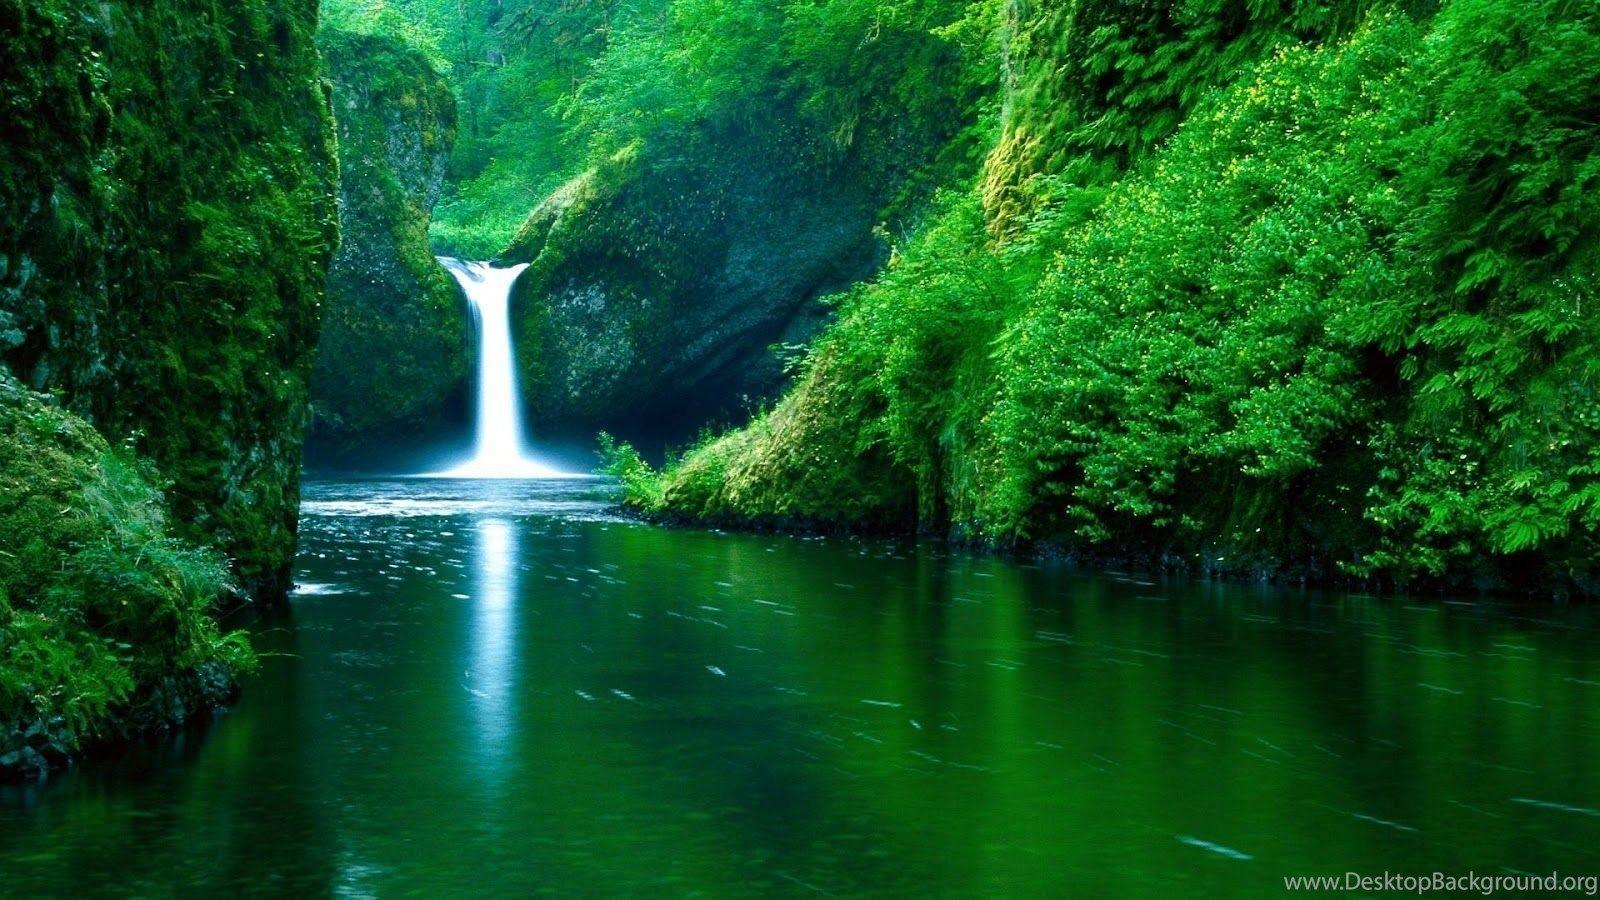 Waterfall forest green 2K nature backgrounds wallpapers for